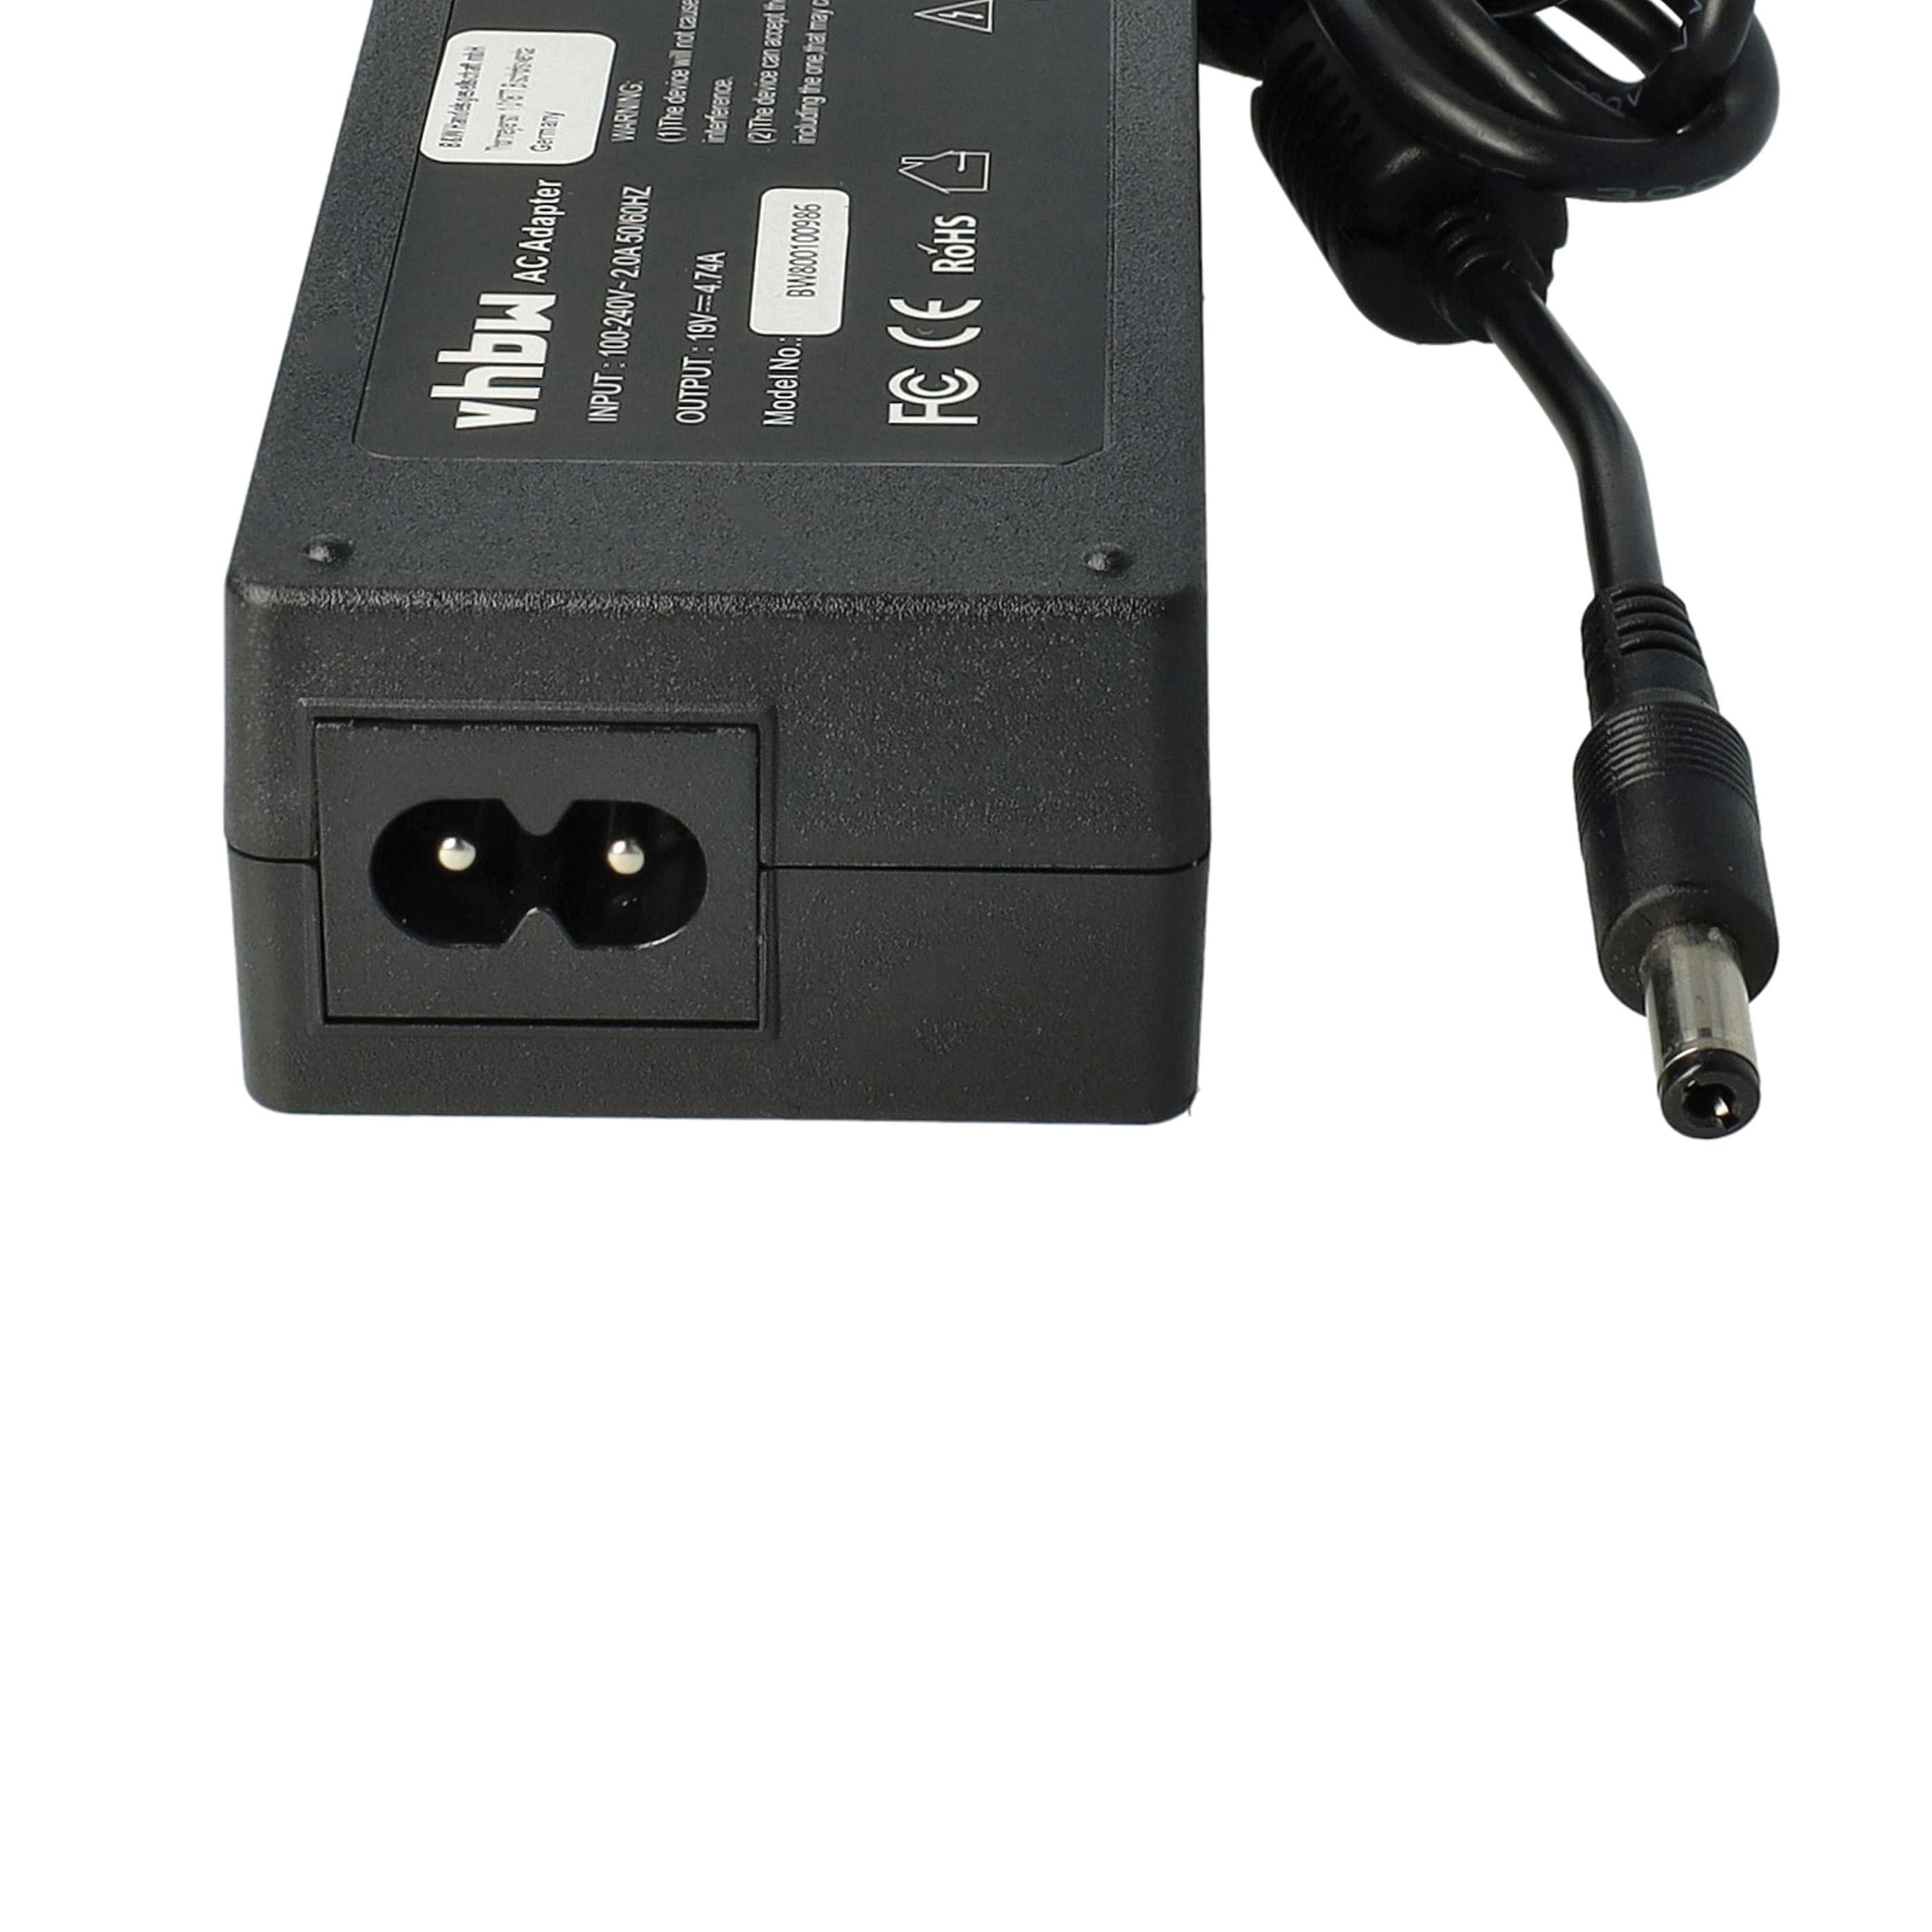 Mains Power Adapter replaces Acer 0335A1965, 25.10147.011, SADP-65KB forNotebook, 90 W